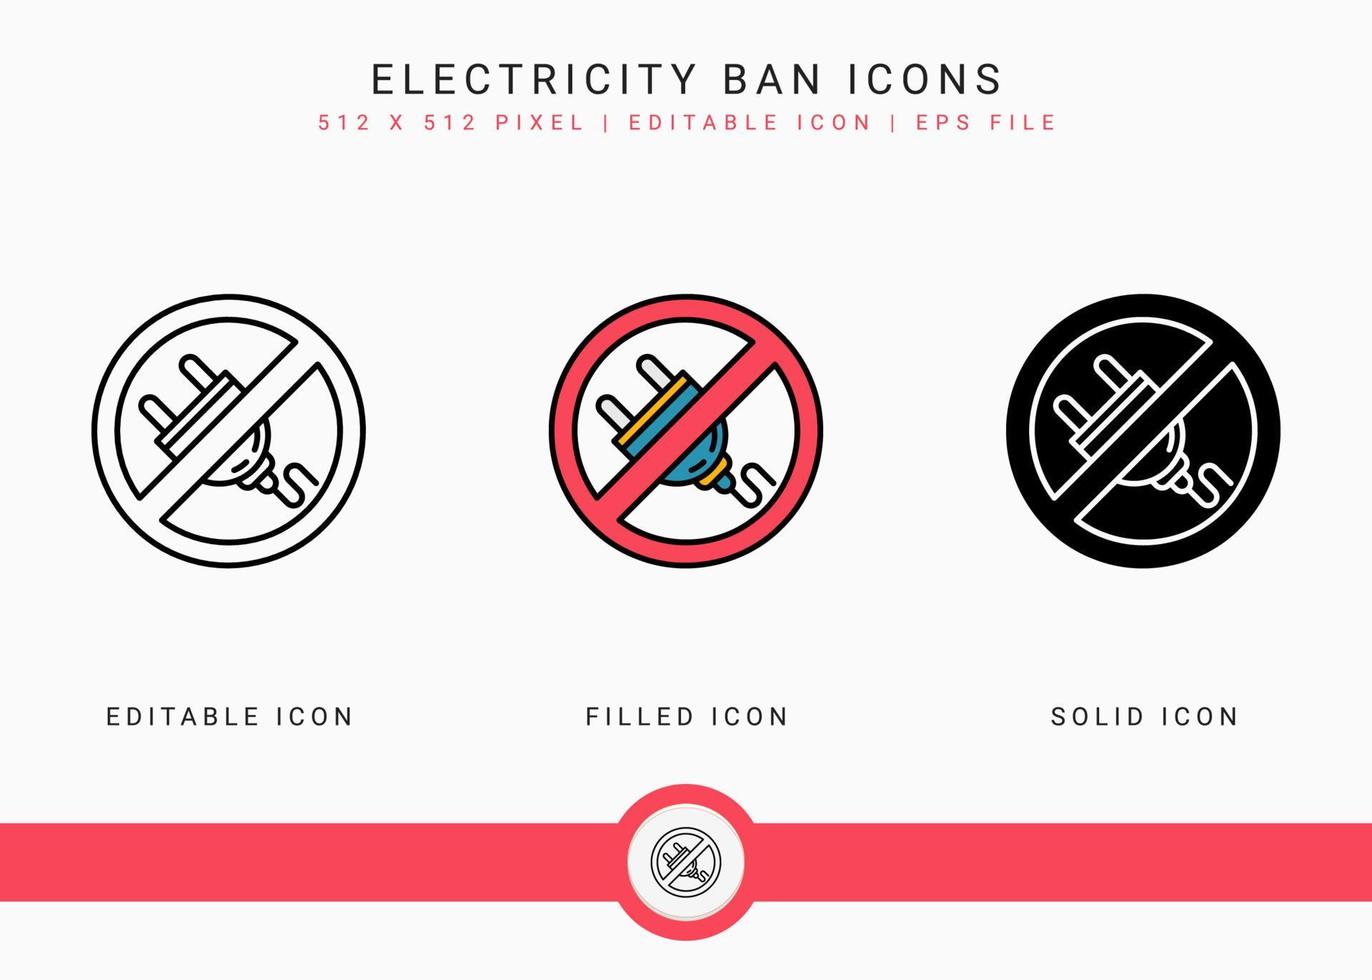 Electricity ban icons set vector illustration with solid icon line style. Power outage symbol. Editable stroke icon on isolated background for web design, user interface, and mobile application